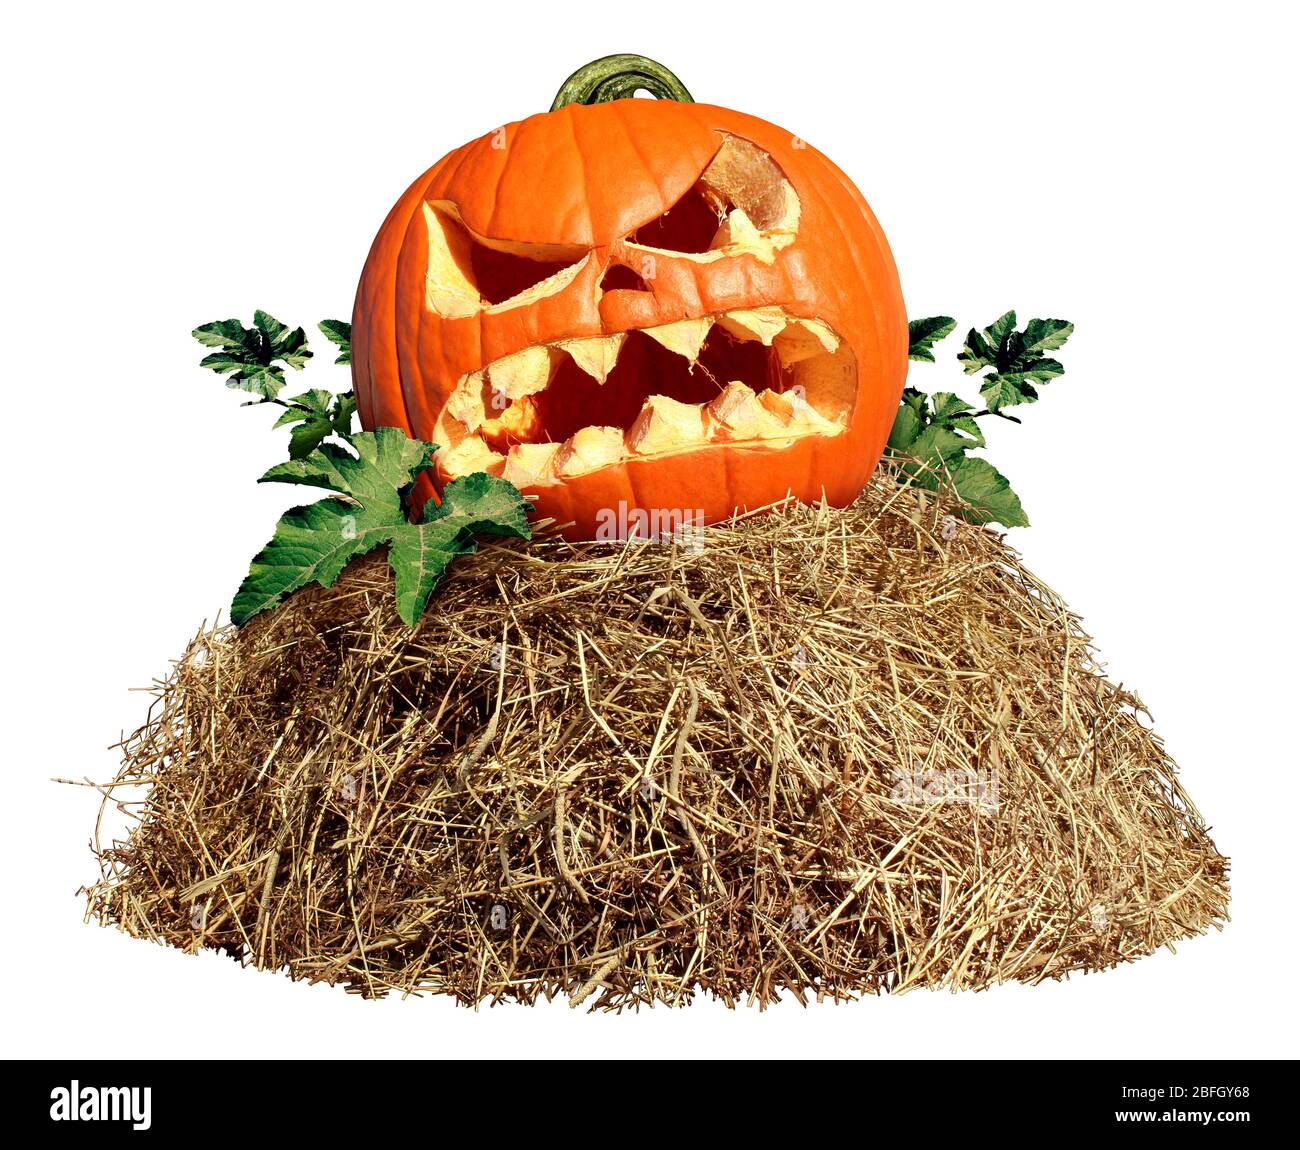 Halloween Hay pile with a carved pumpkin isolated on a white background as an agriculture farm and farming symbol of harvest time with dried grass. Stock Photo